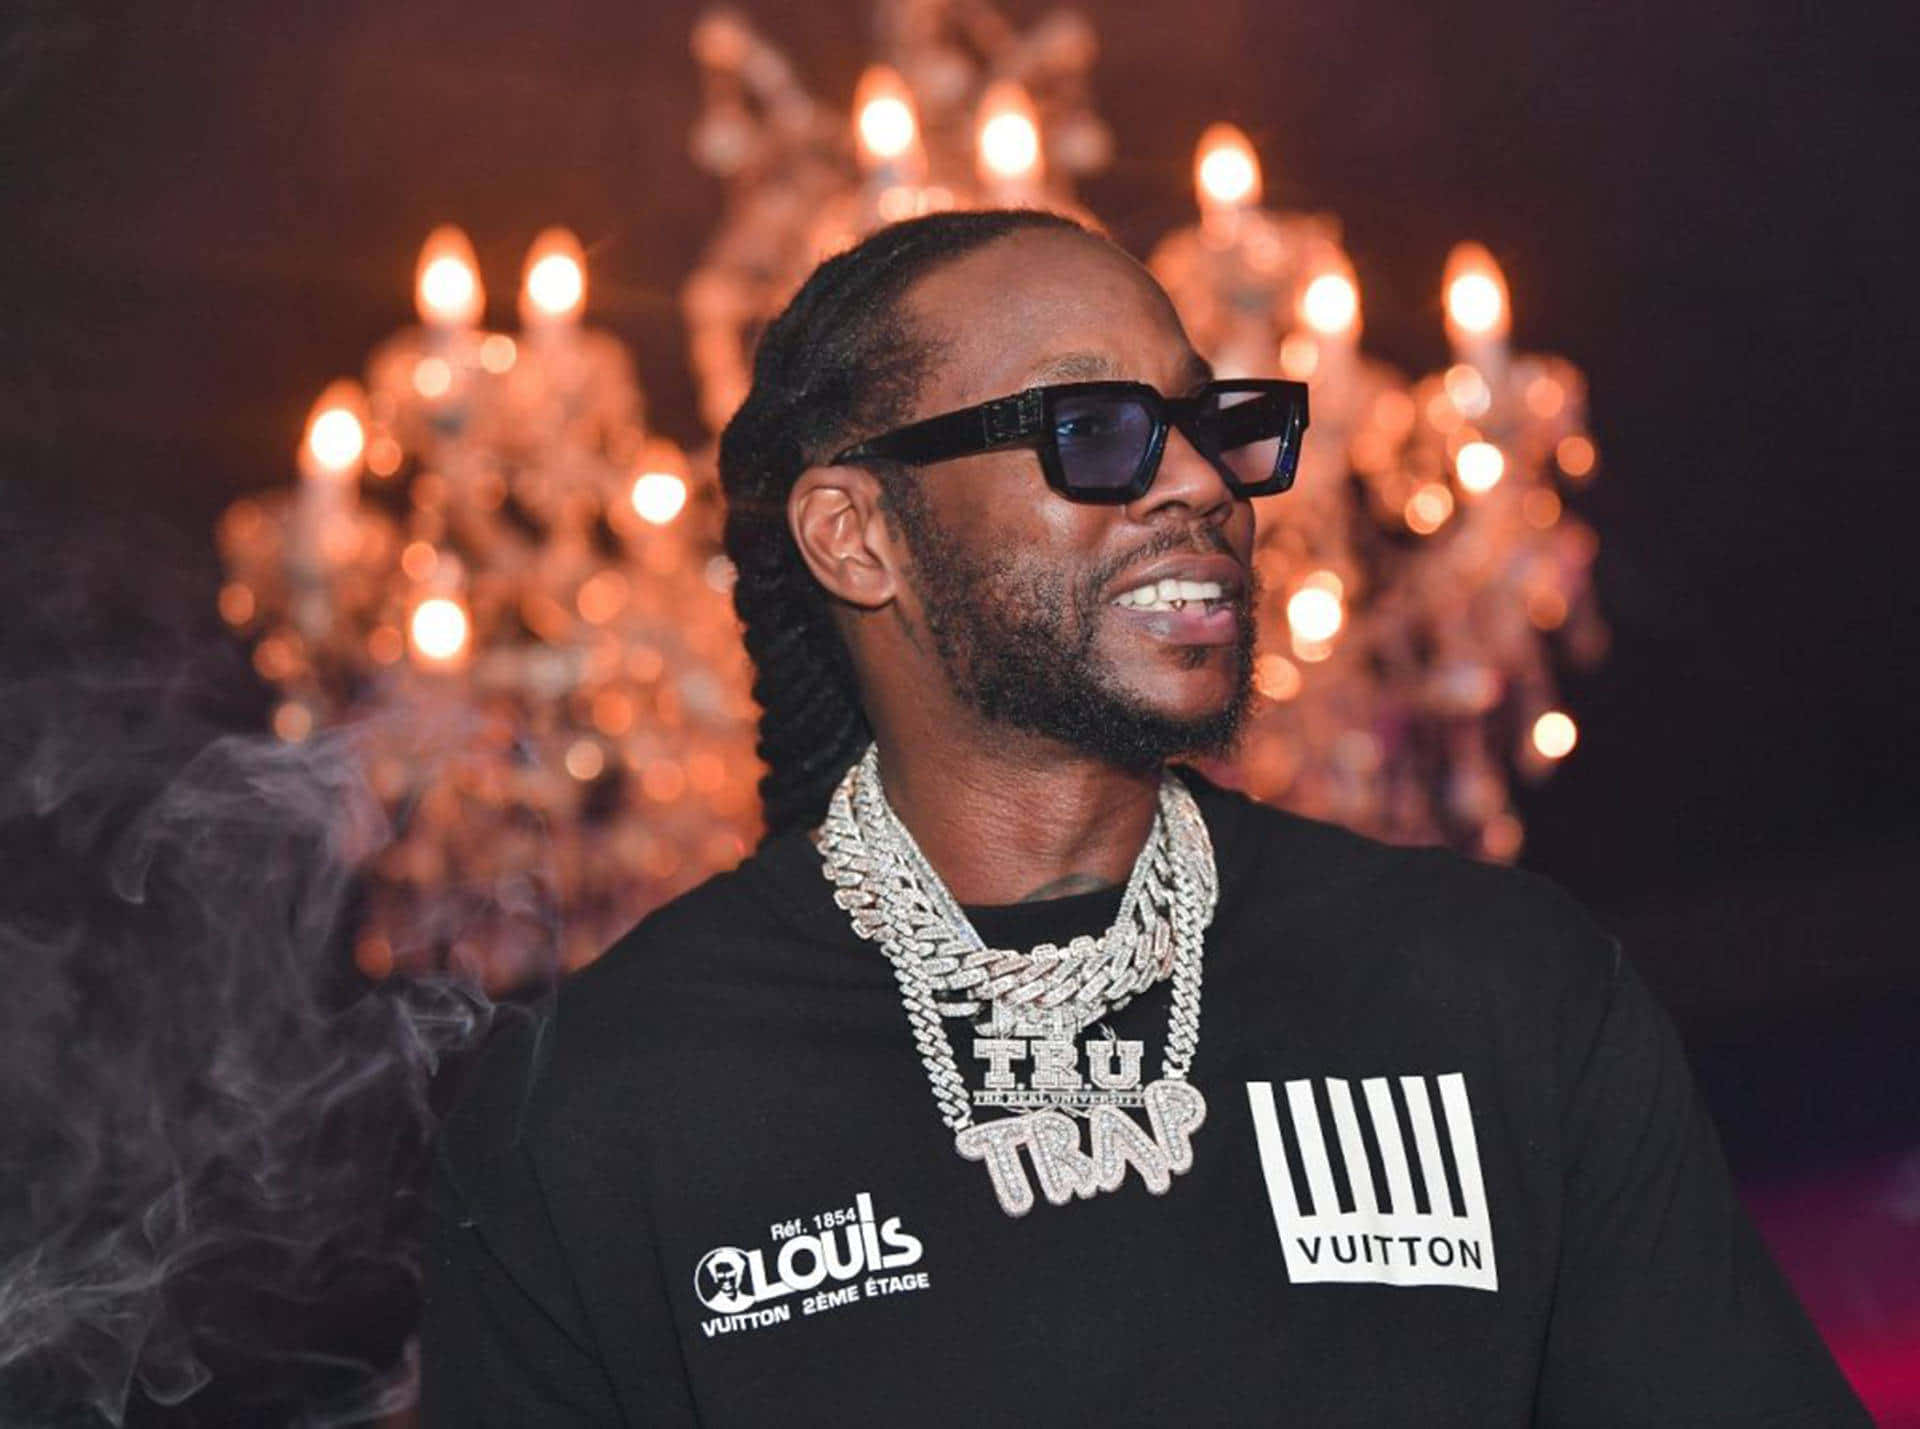 2 Chainz is the hottest artist in the game